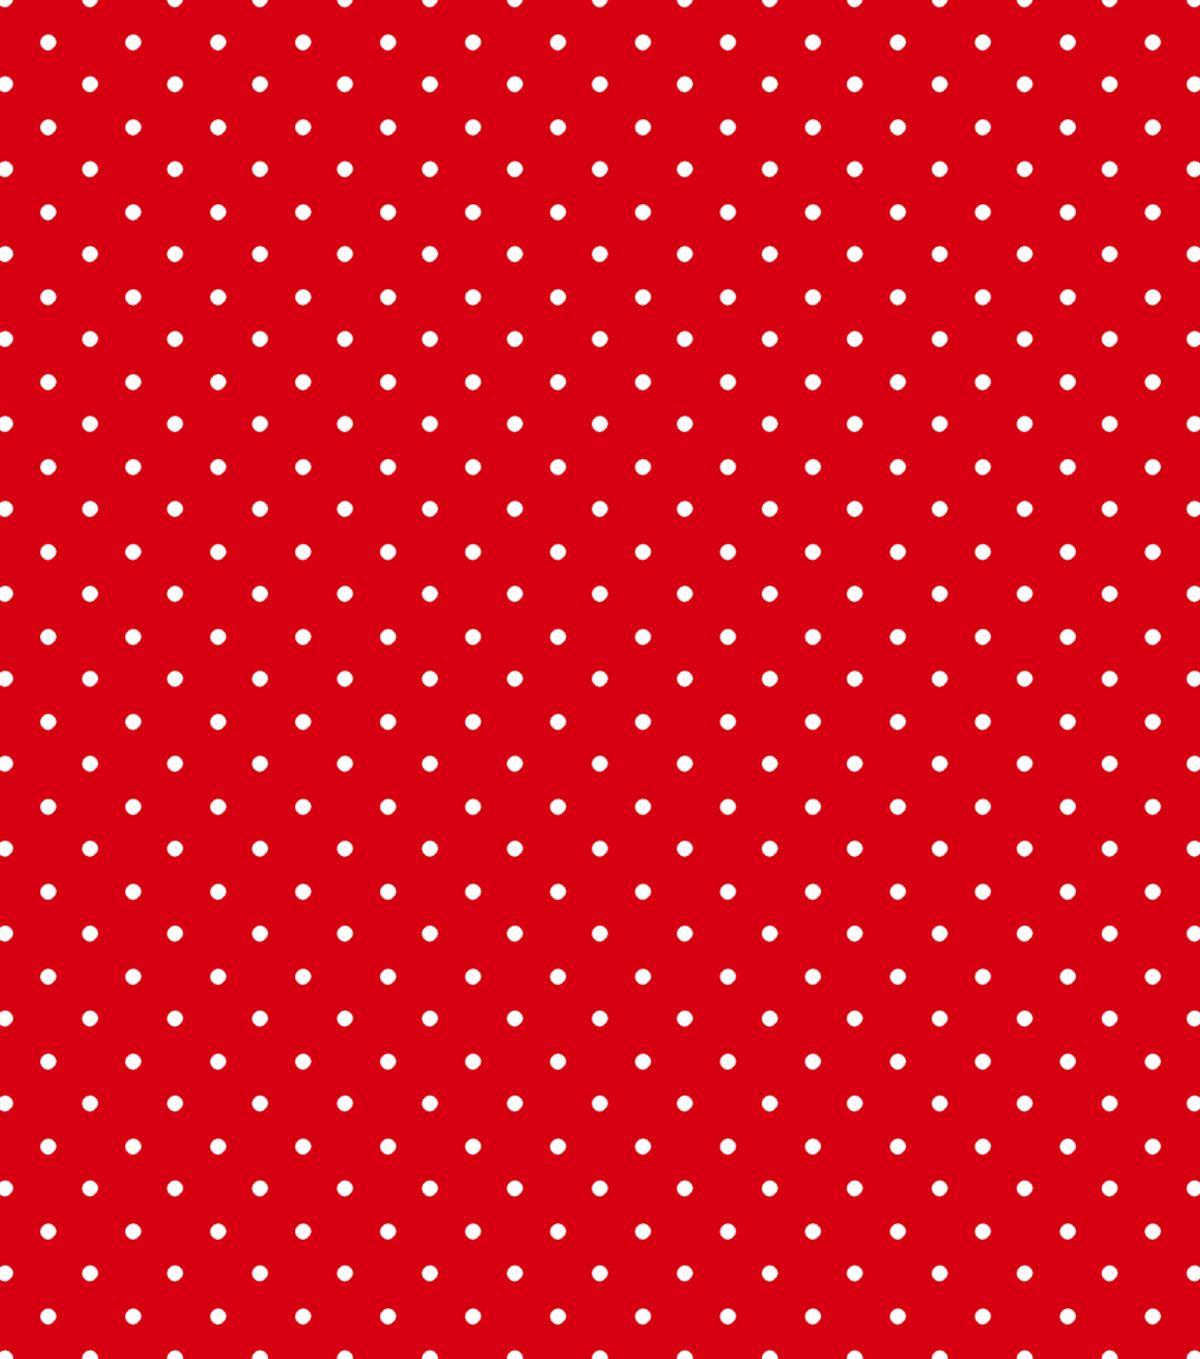 Red and White Dot Logo - Tutti Fruitti Collection- Small Polka Dot Red White